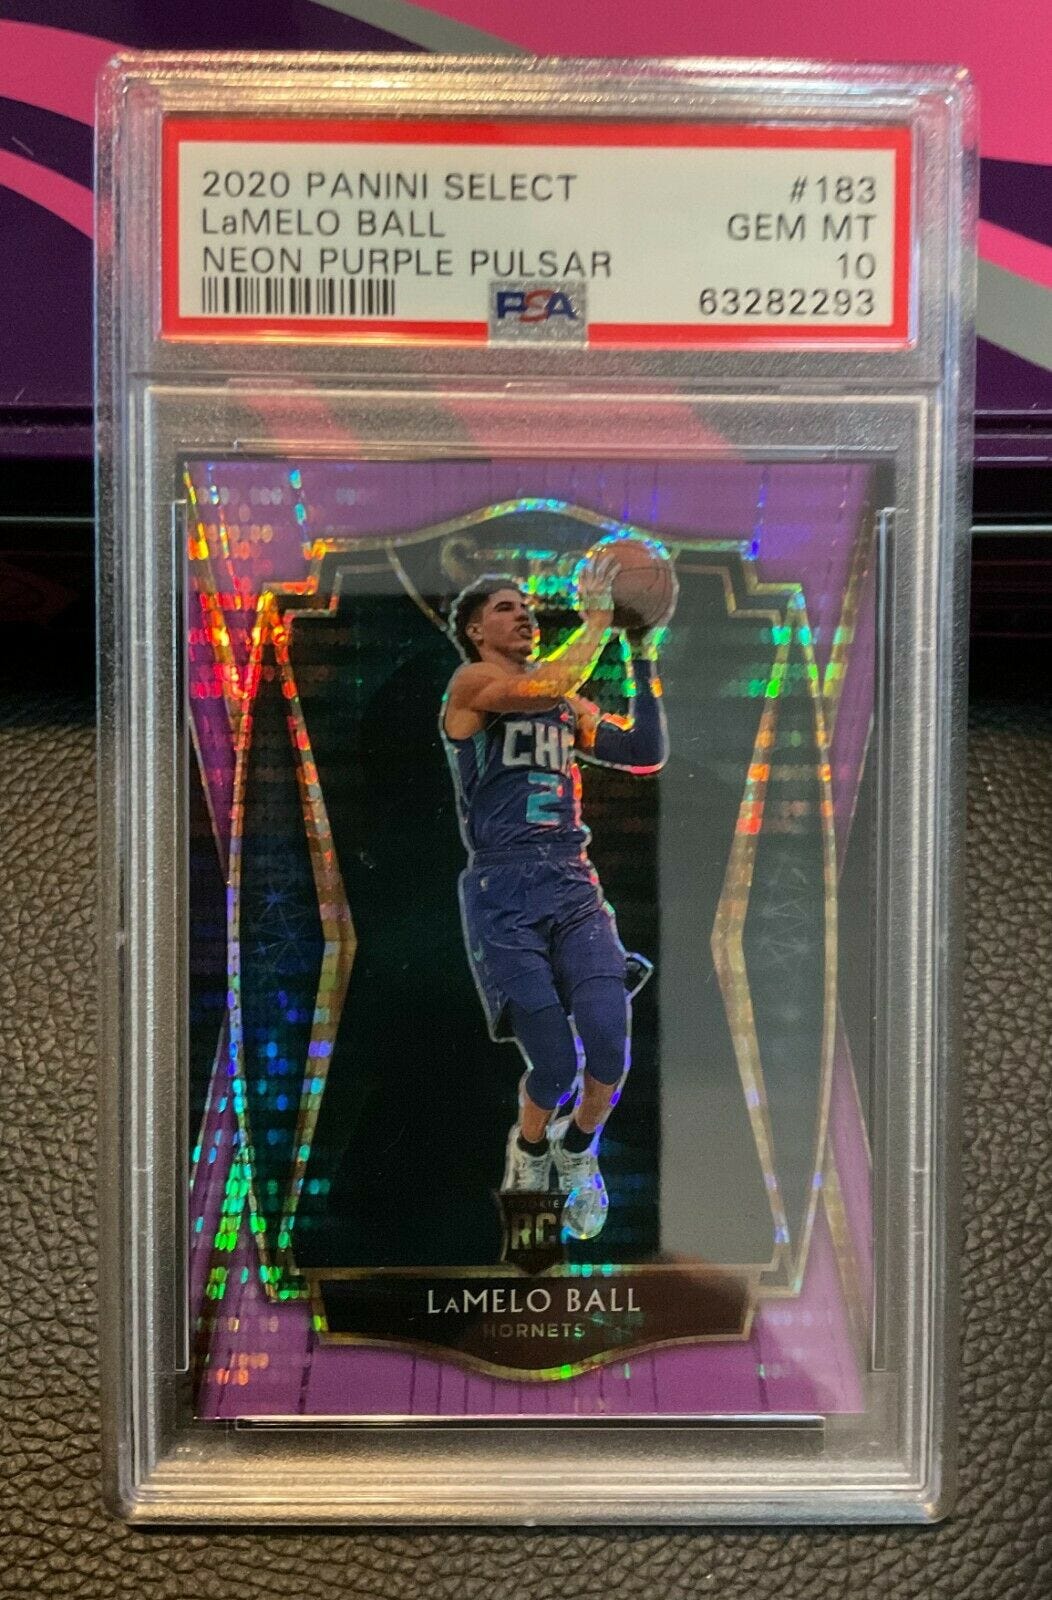 2020 Panini Prizm LaMelo Ball Cracked Red Ice PSA 10 Gem Mint #278